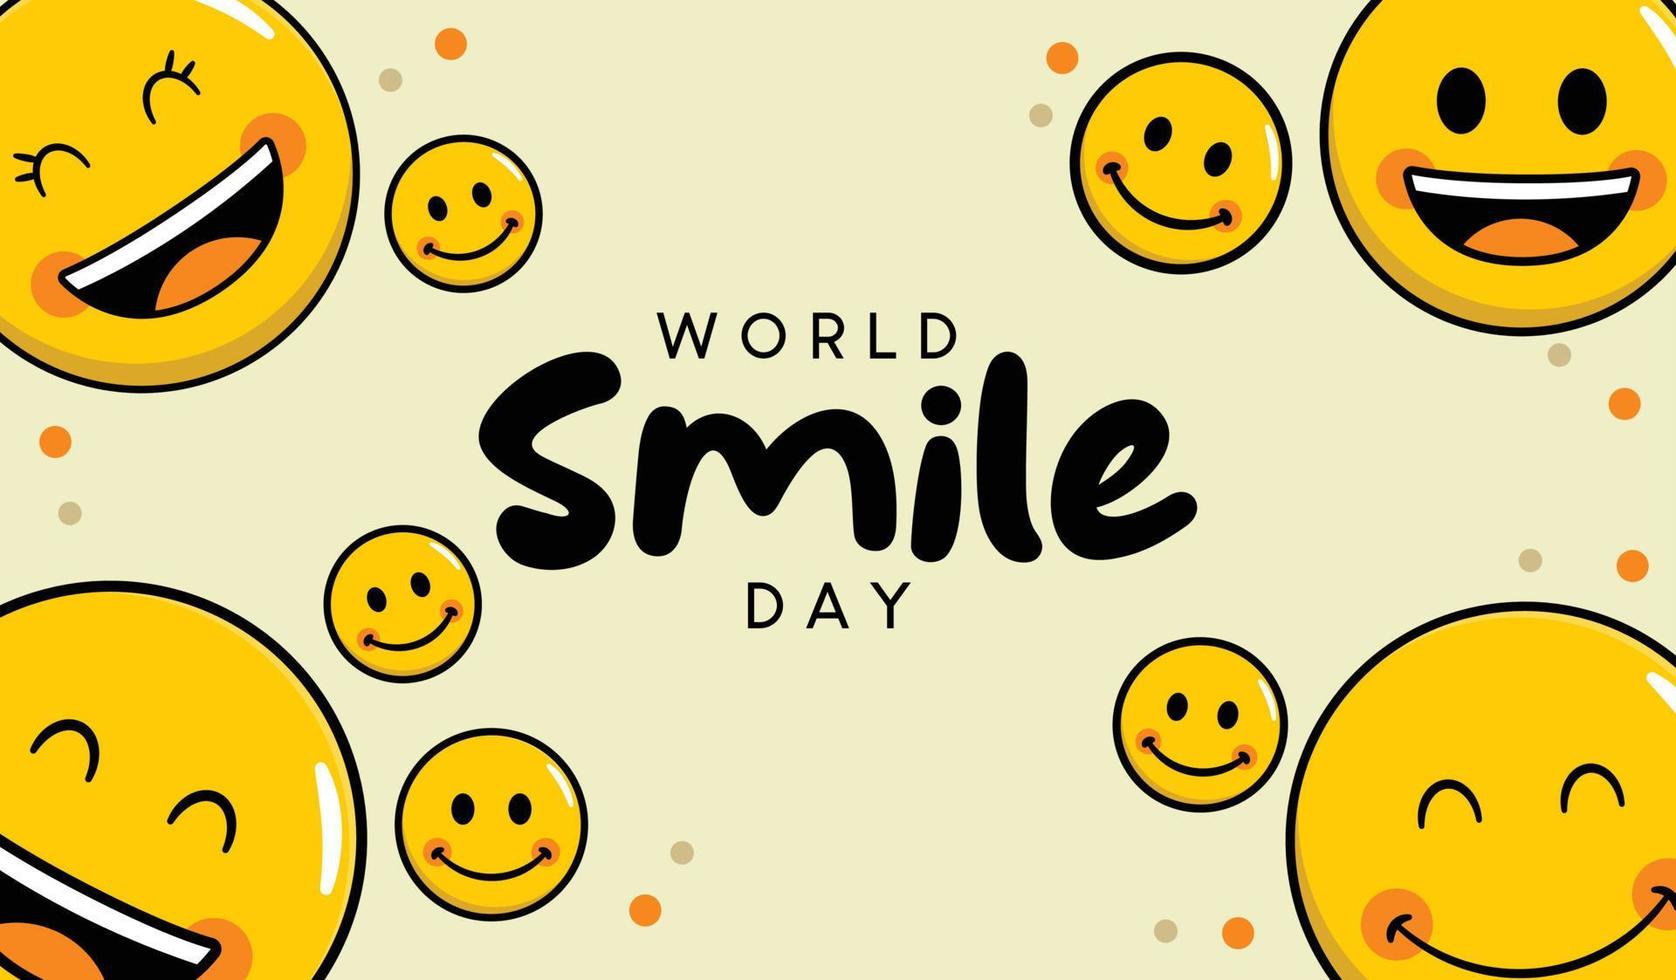 World smile day background vector